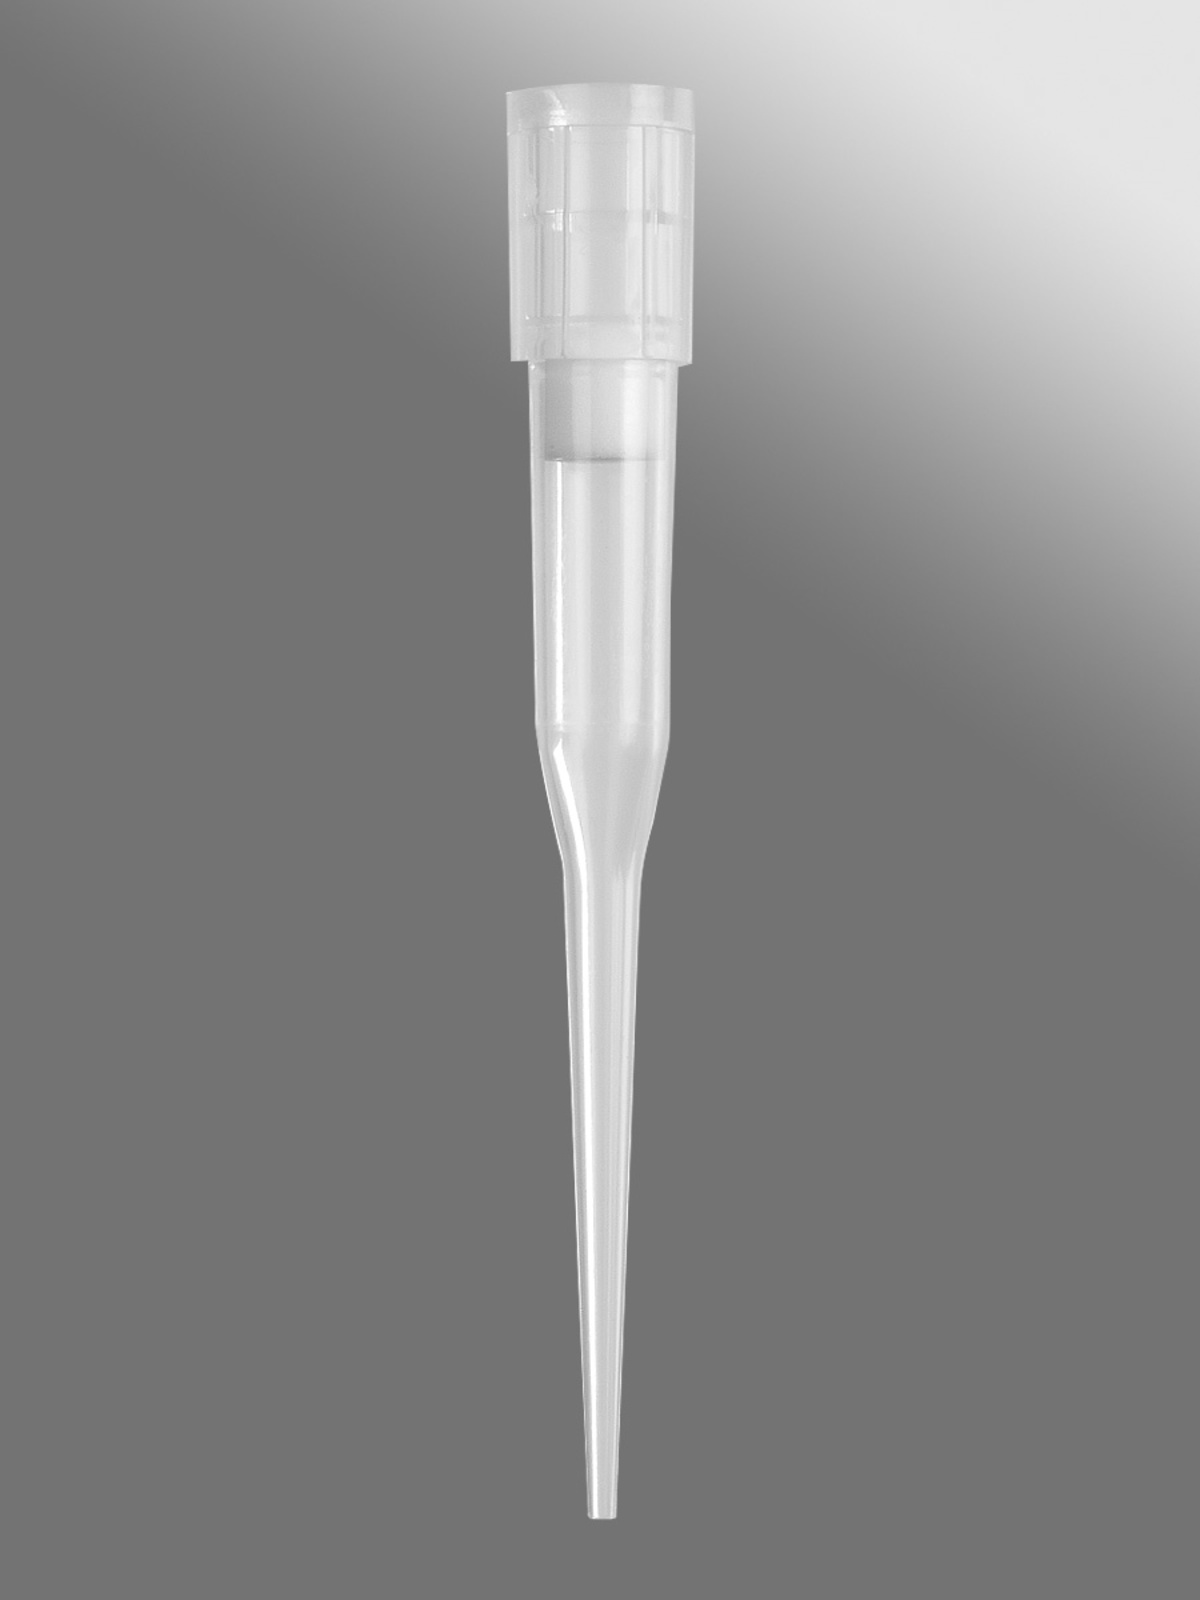 165ul Clear Maxymum Recovery Sterilized Filtered Pipet Tips for Beckman FX Robotics System